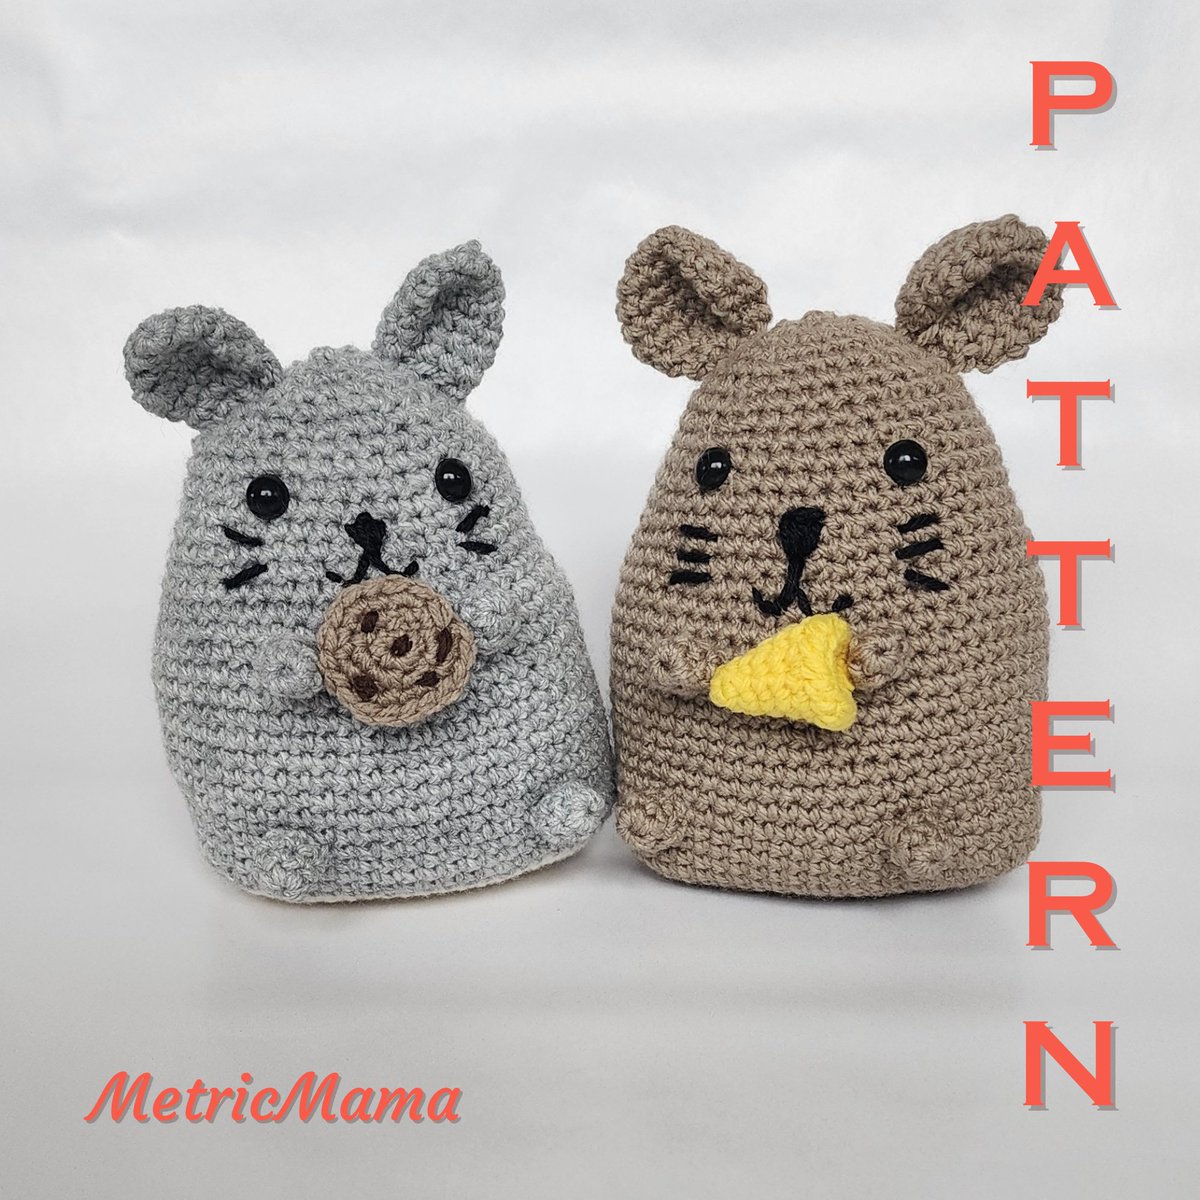 Check out this new adorable
amigurumi pattern for a mouse and chinchilla!

etsy.com/au/listing/166…

#babyshowergift #babygift #babygifts #babycrochet #toddlercrochet #toddlergift #toddlergifts #crochet #amigurumi #kidsgift